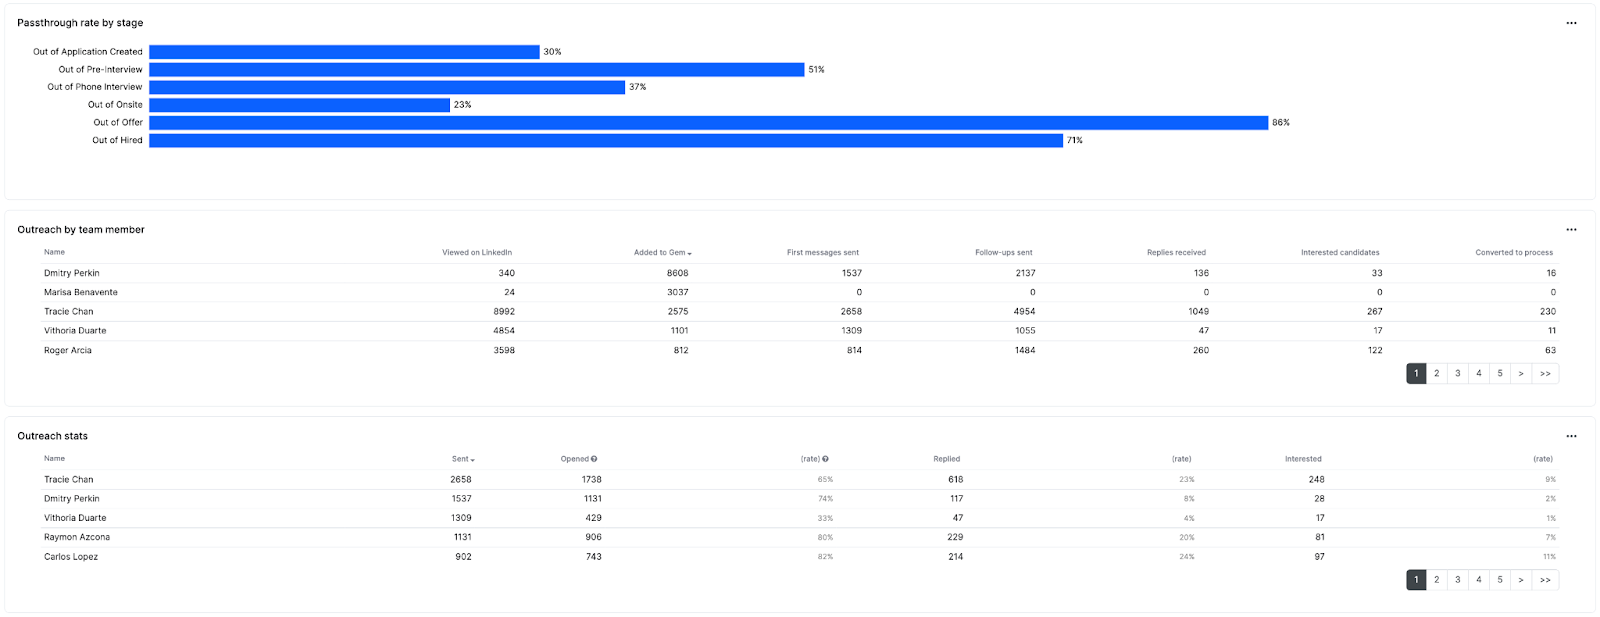 Pipeline Composition Dashboard 4: Passthrough Rate and Outreach